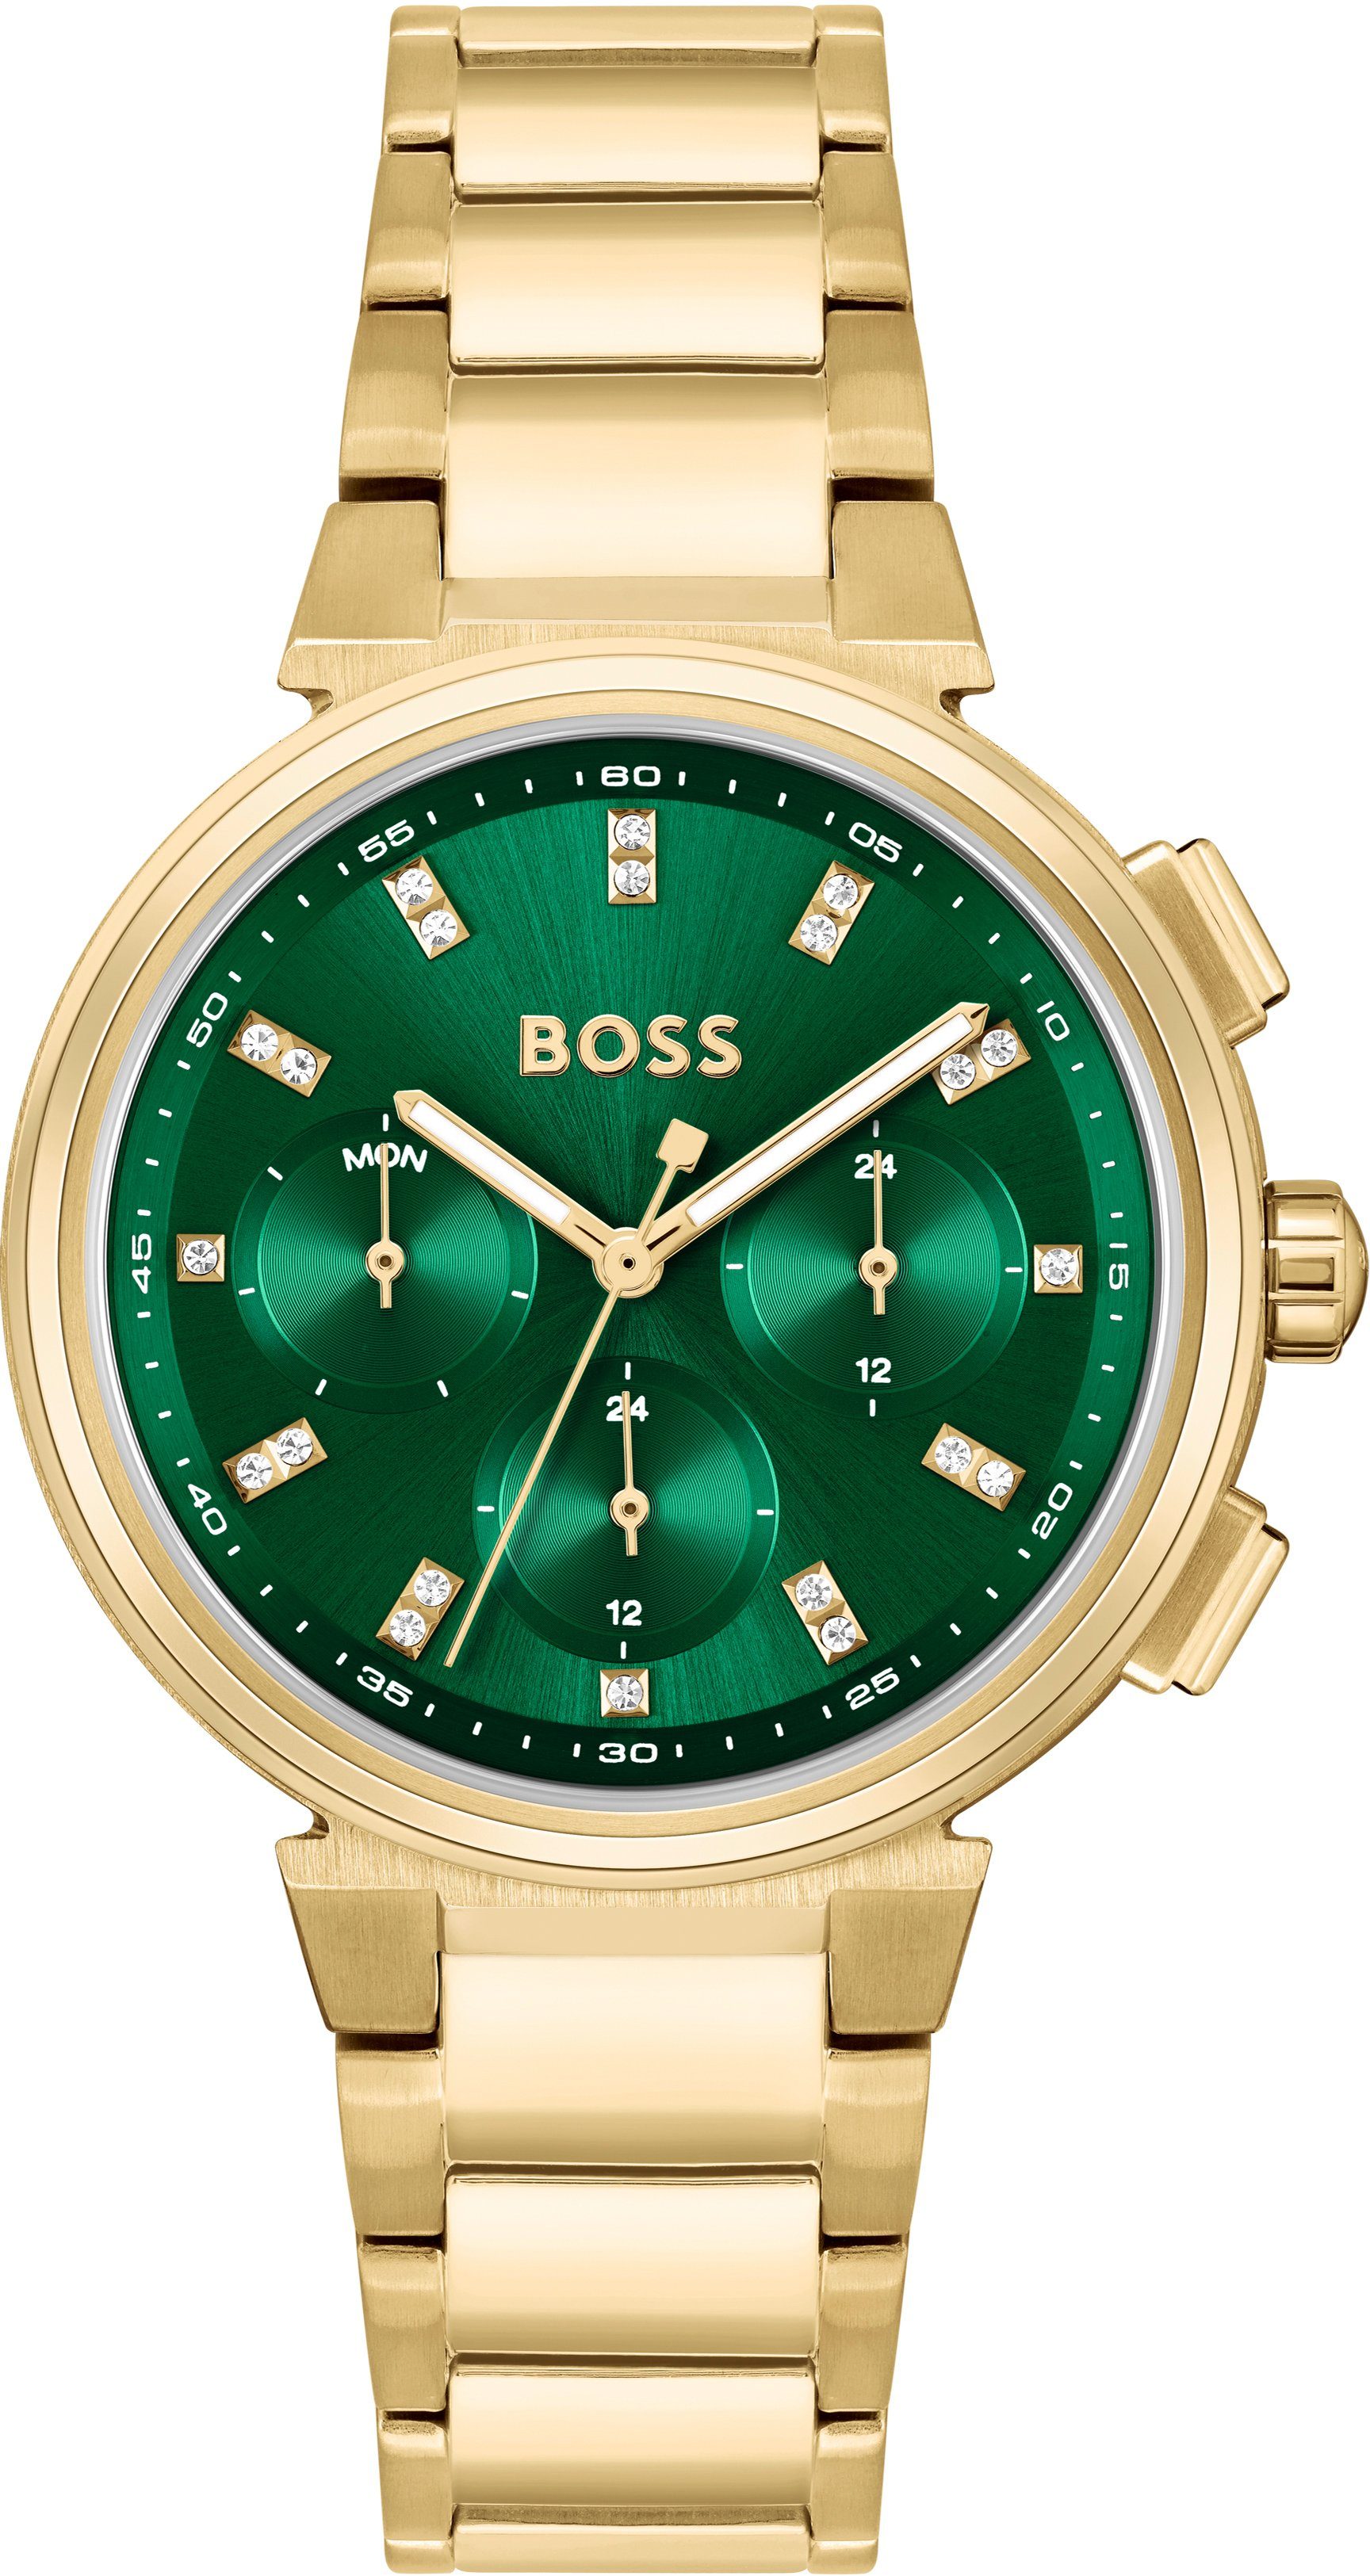 BOSS Multifunktionsuhr ONE, 1502679